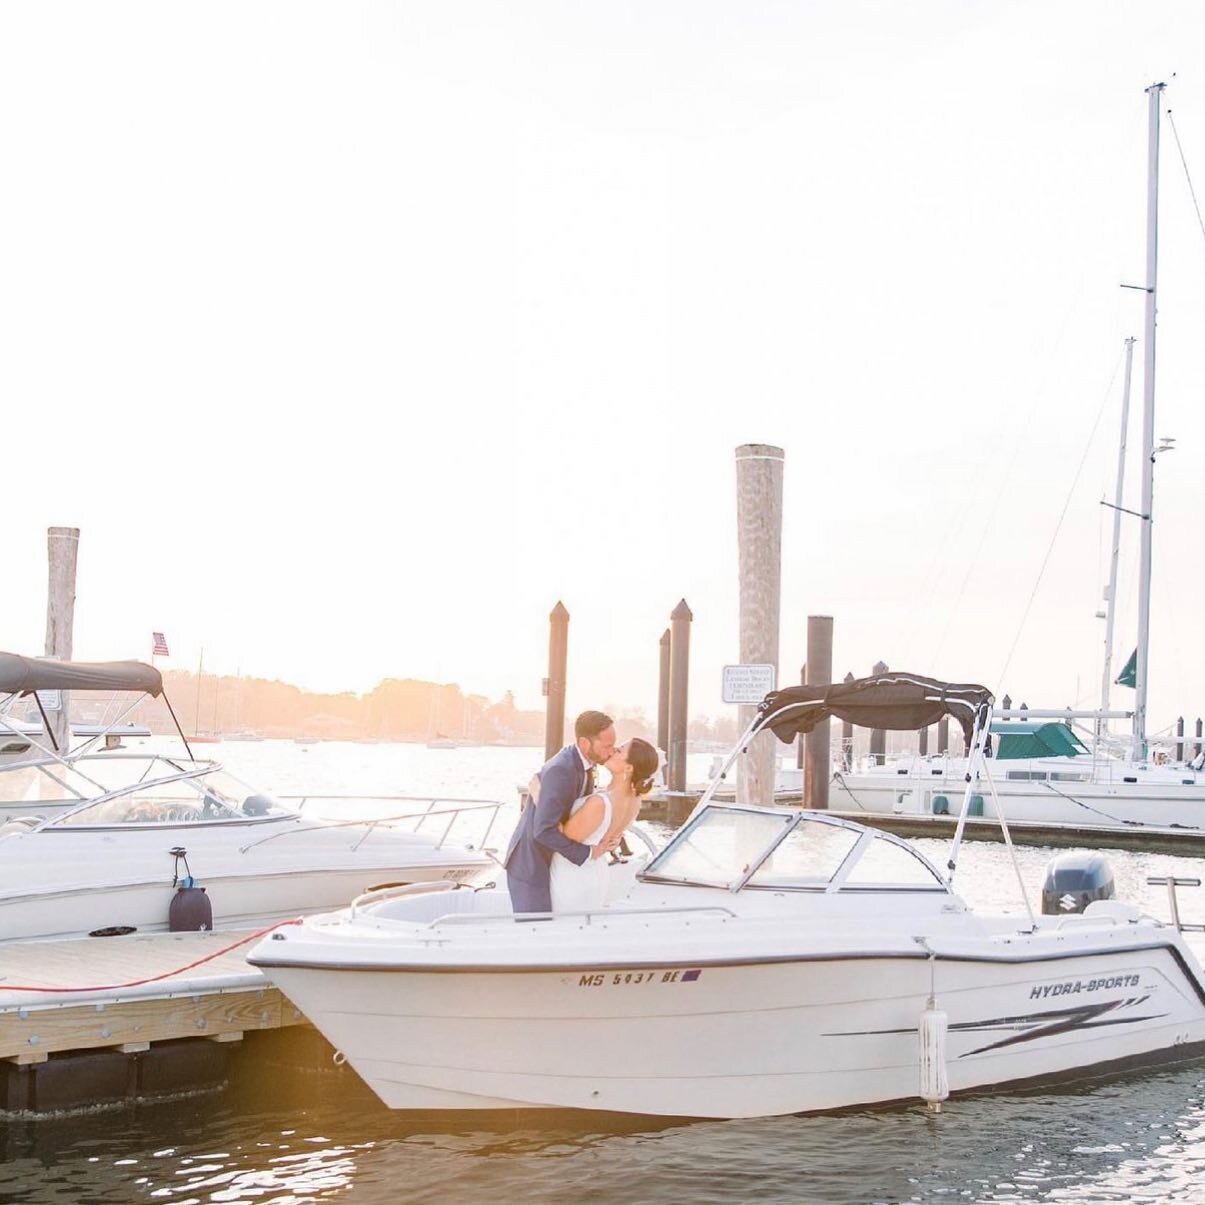 RI is considered the Ocean State.  So, it&rsquo;s only fitting for a boat to be included on your wedding day.  Don&rsquo;t you think? 
💕👰🏻&zwj;♀️🤵🏼&zwj;♂️⚓️💕

Hair + Makeup by @kristenpbeauty_